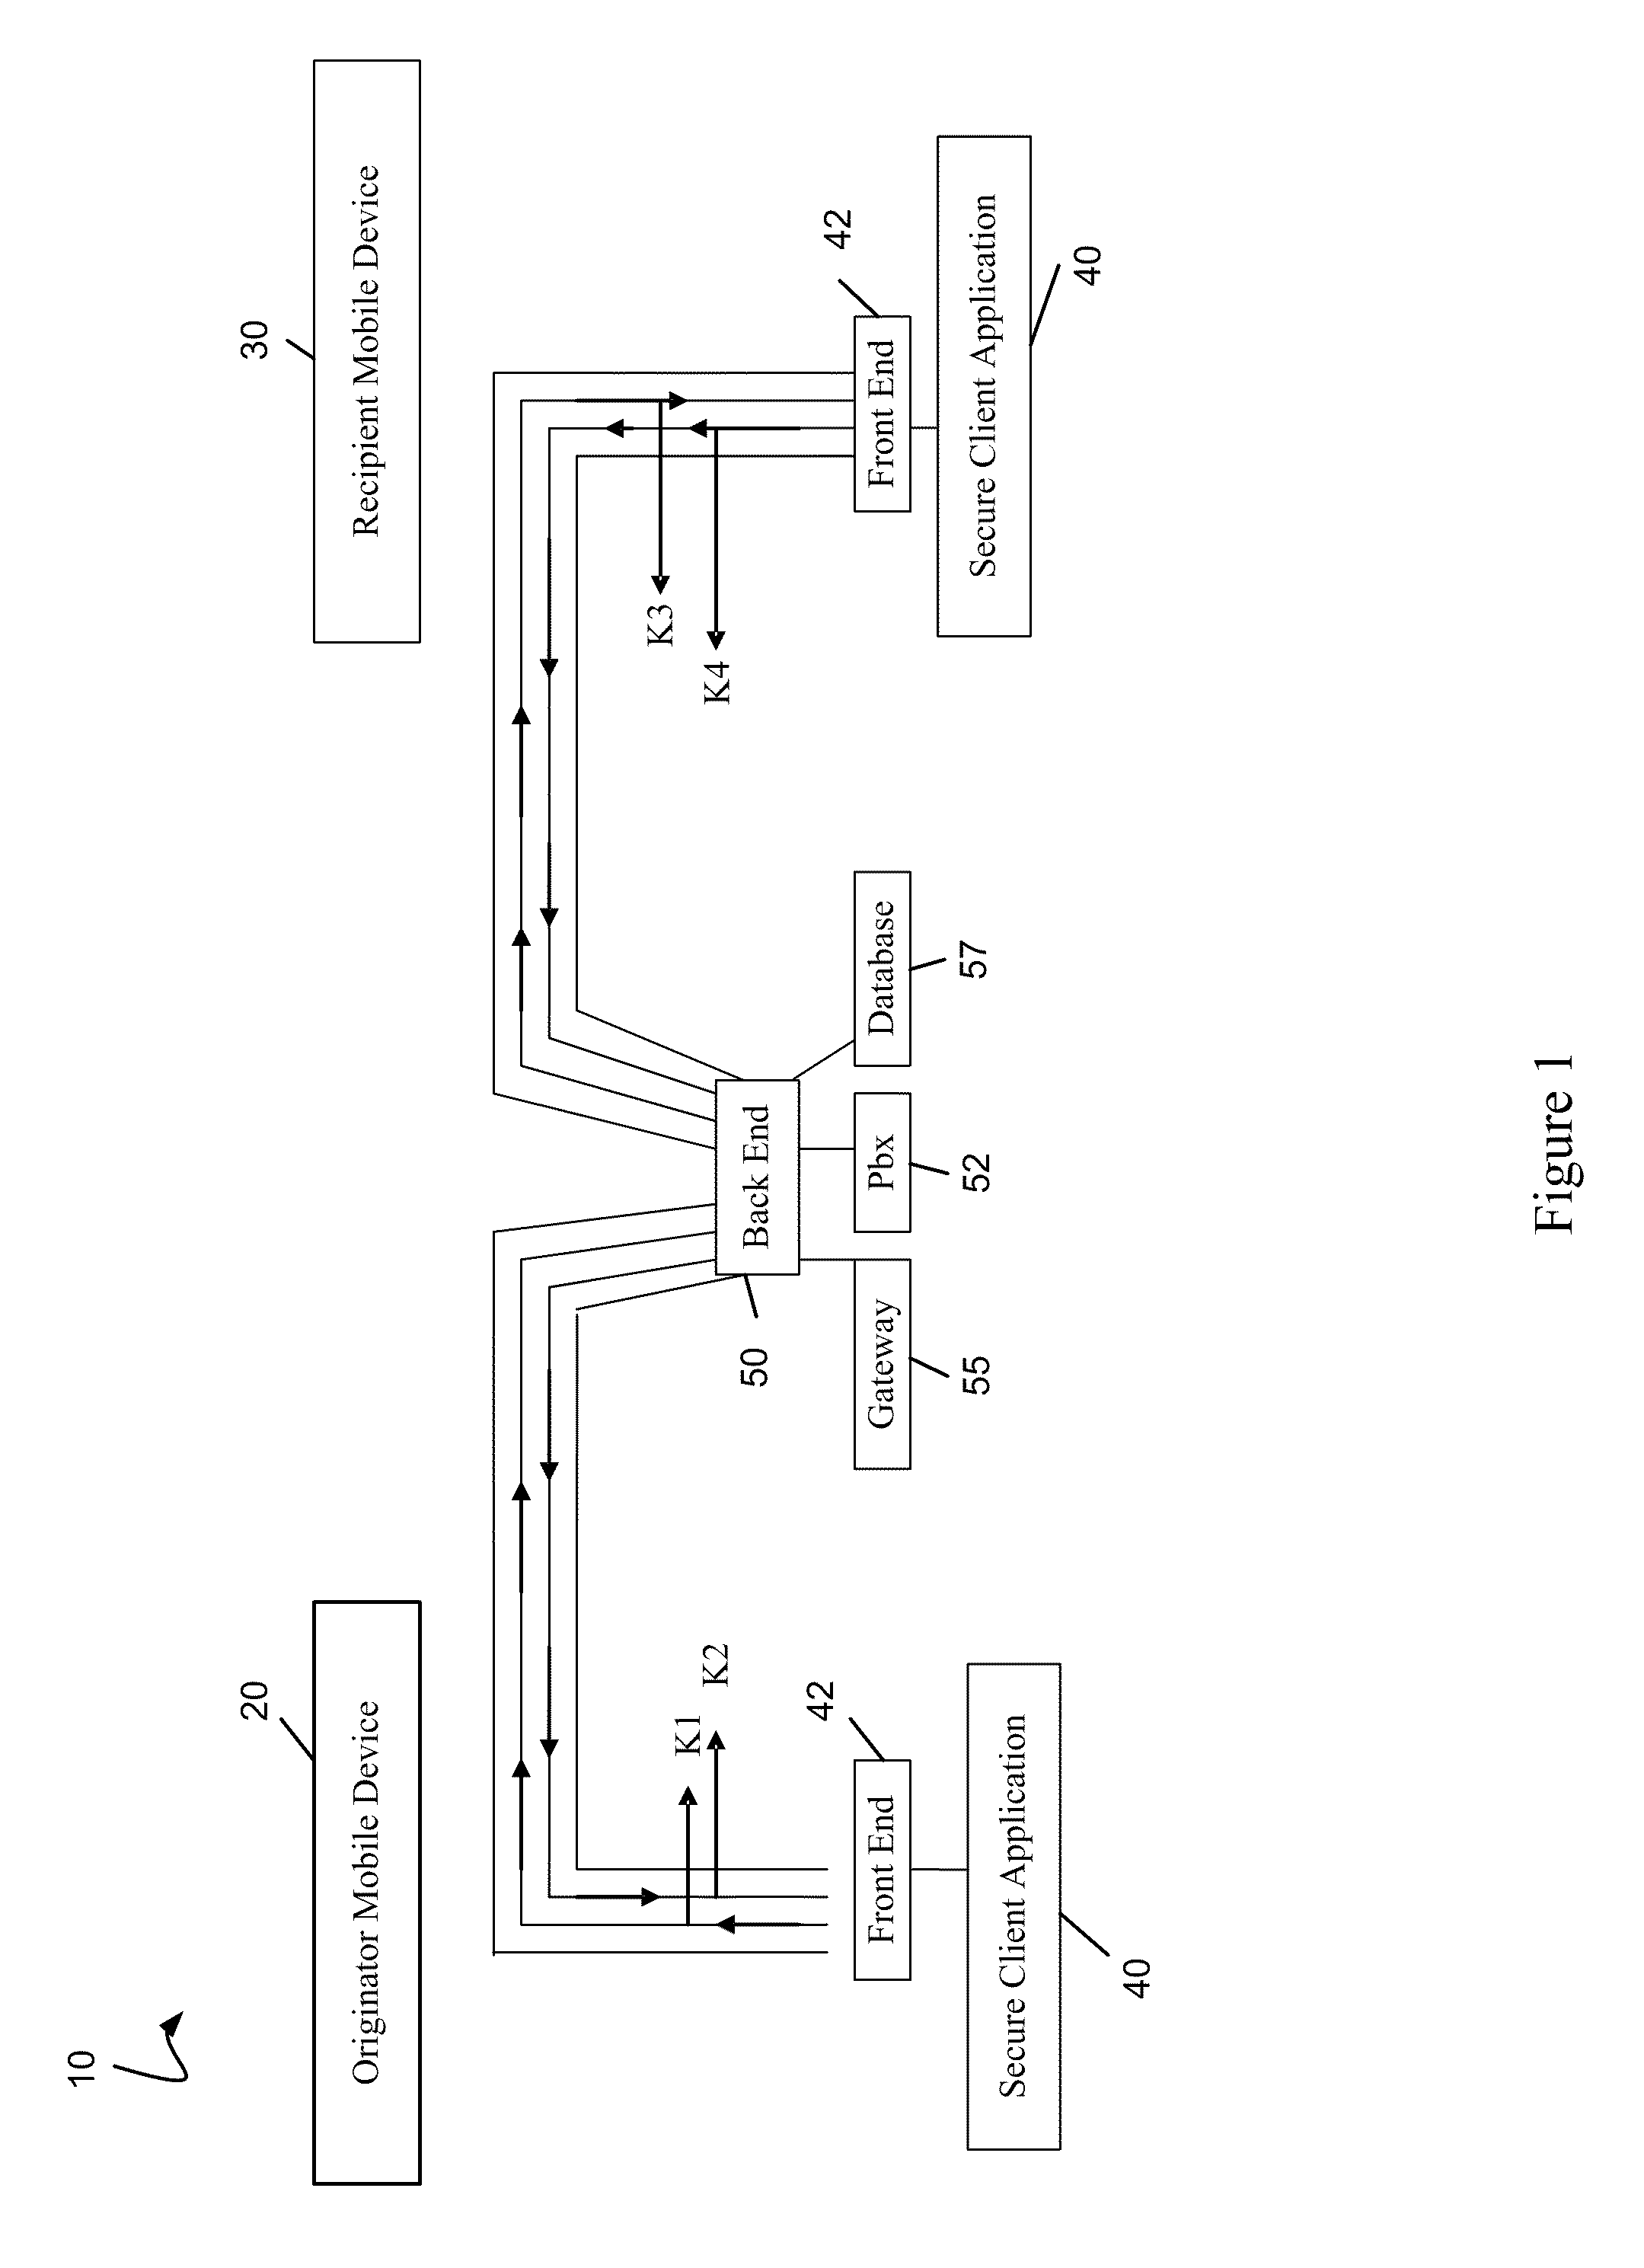 Secure Communication Systems, Methods, and Devices